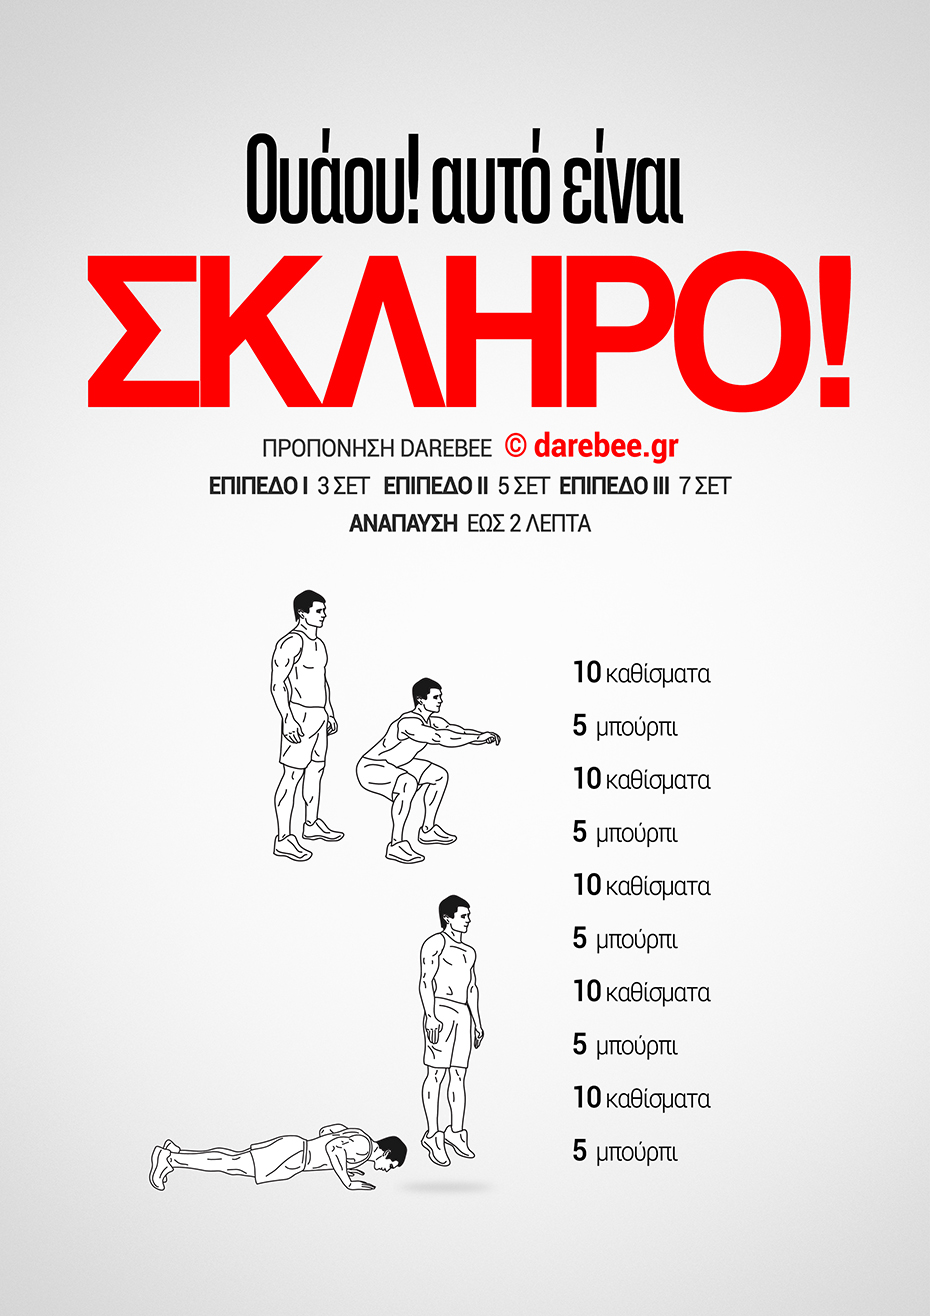 Wow, That's Hard is a Darebee, home-fitness full body, difficulty level IV workout.